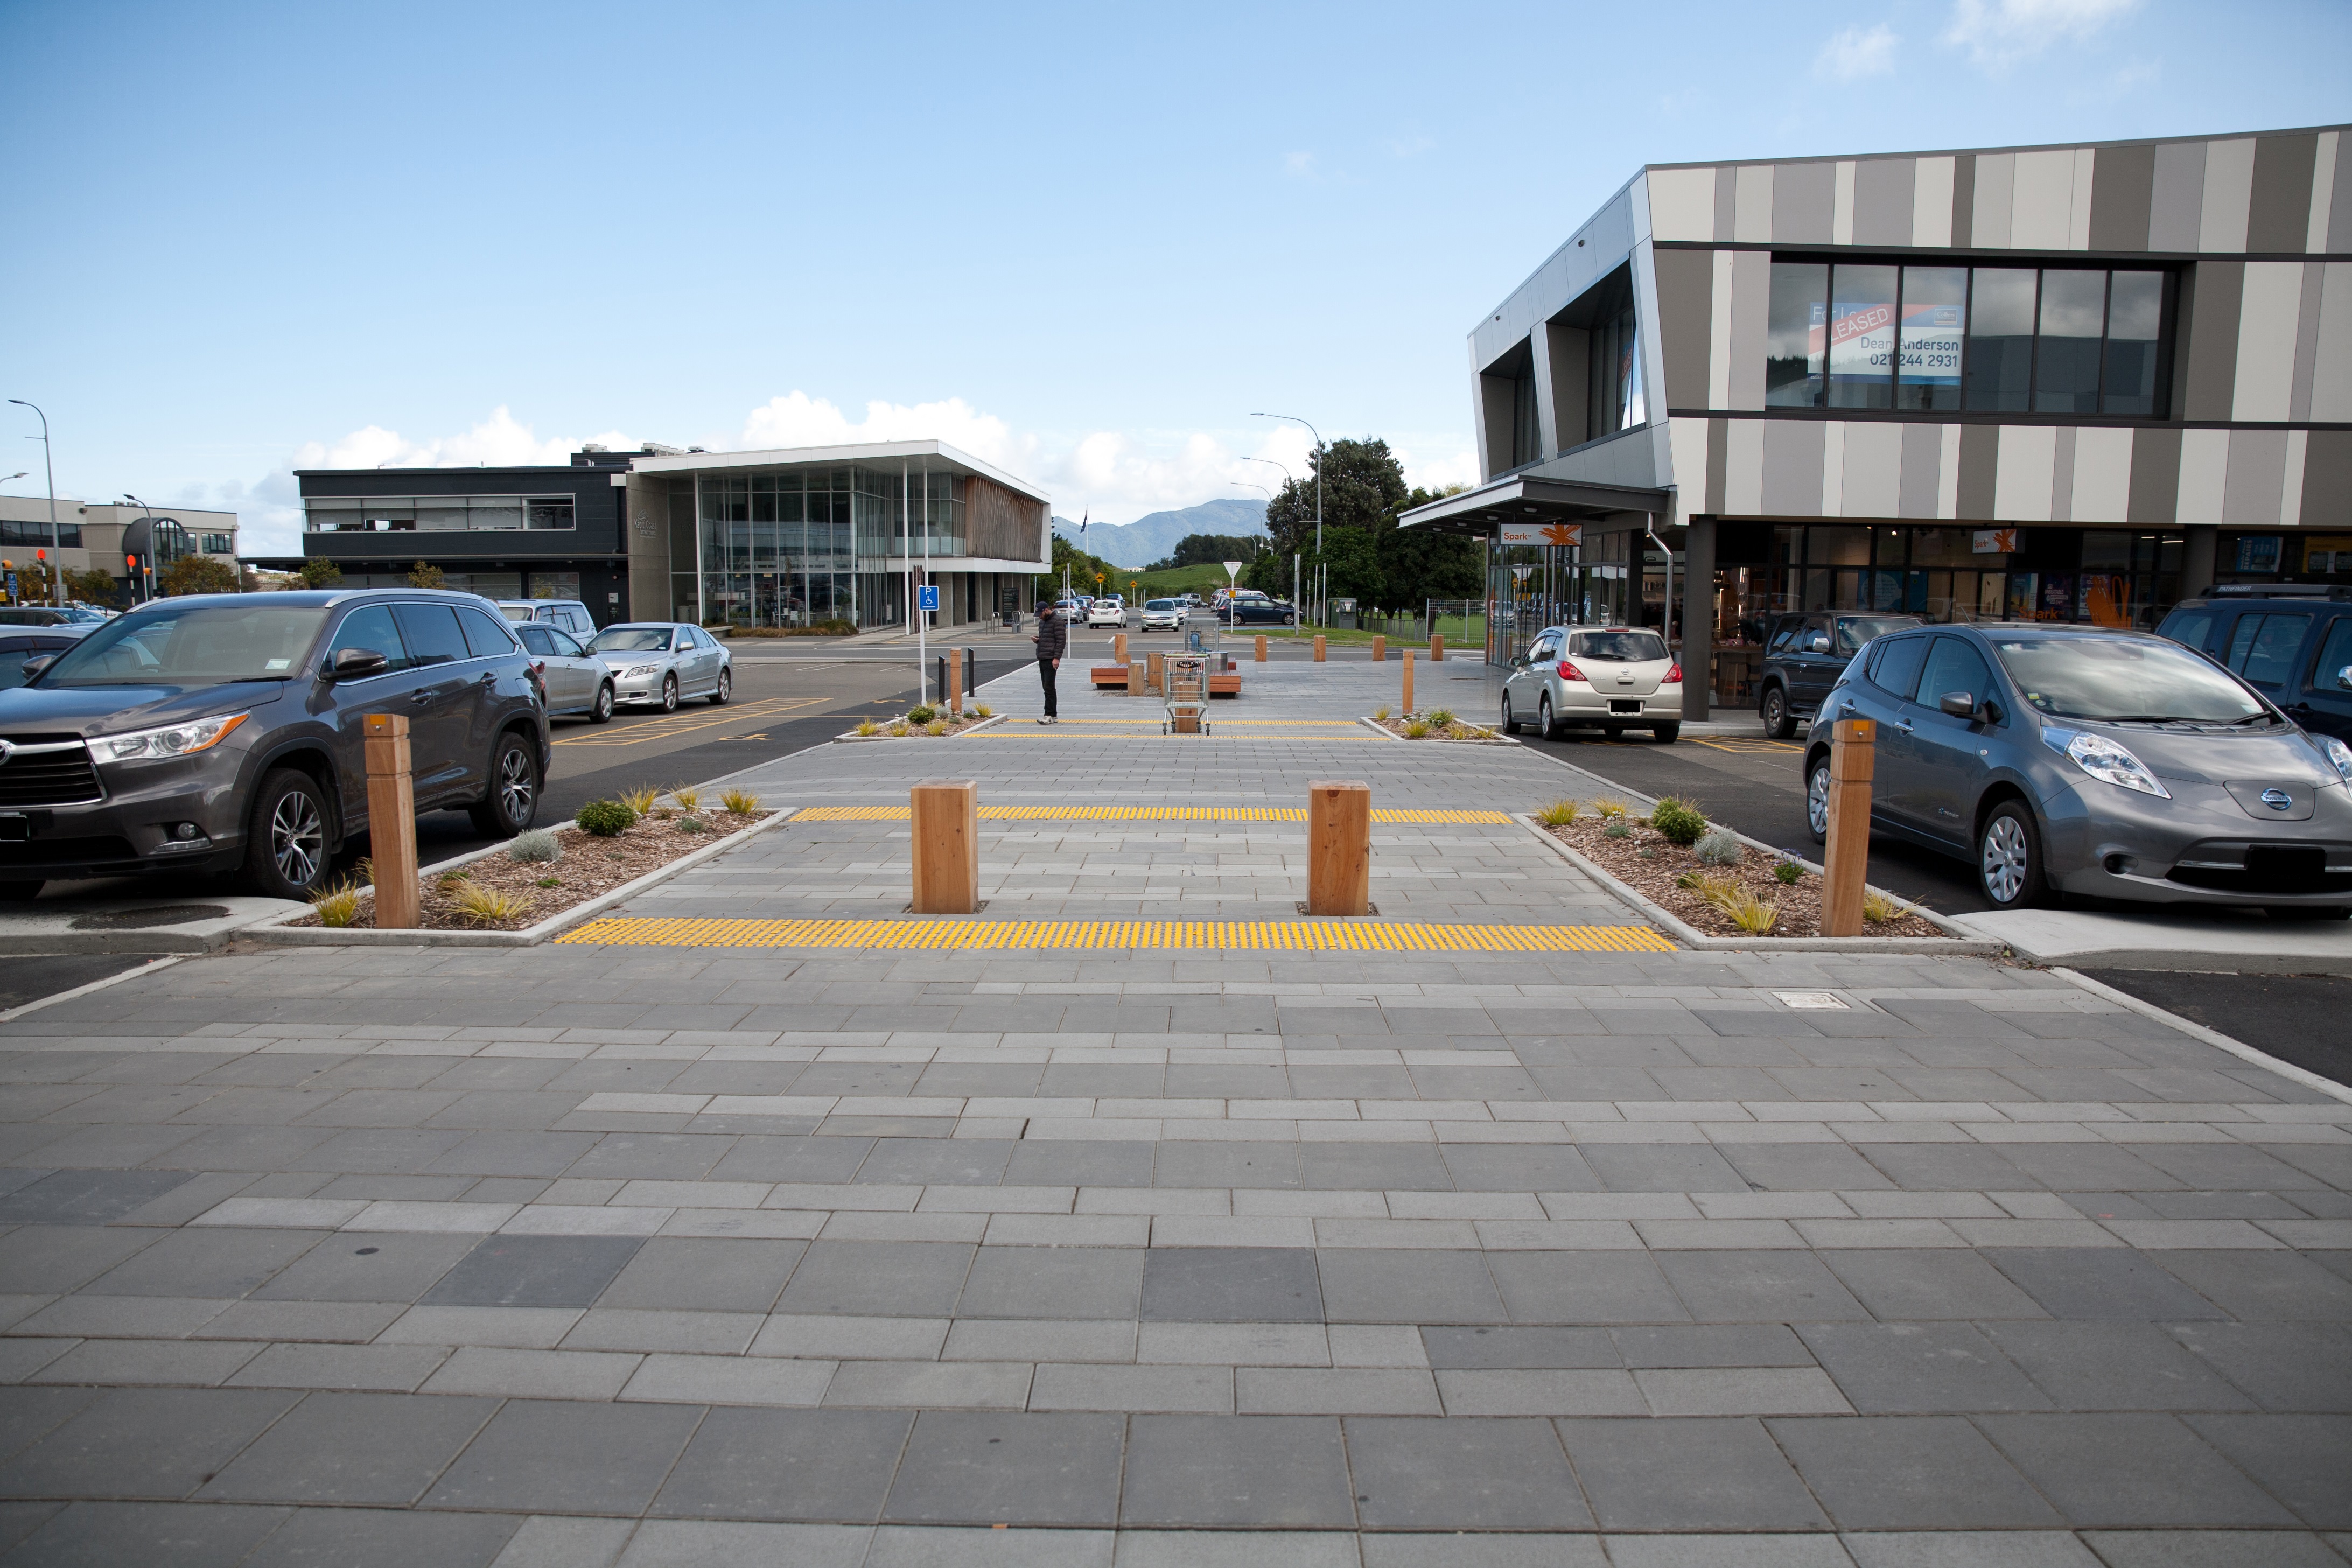 View of Coastlands carpark and Takiri House One and Rimu Road, looking towards Council buildings and Kāpiti Island